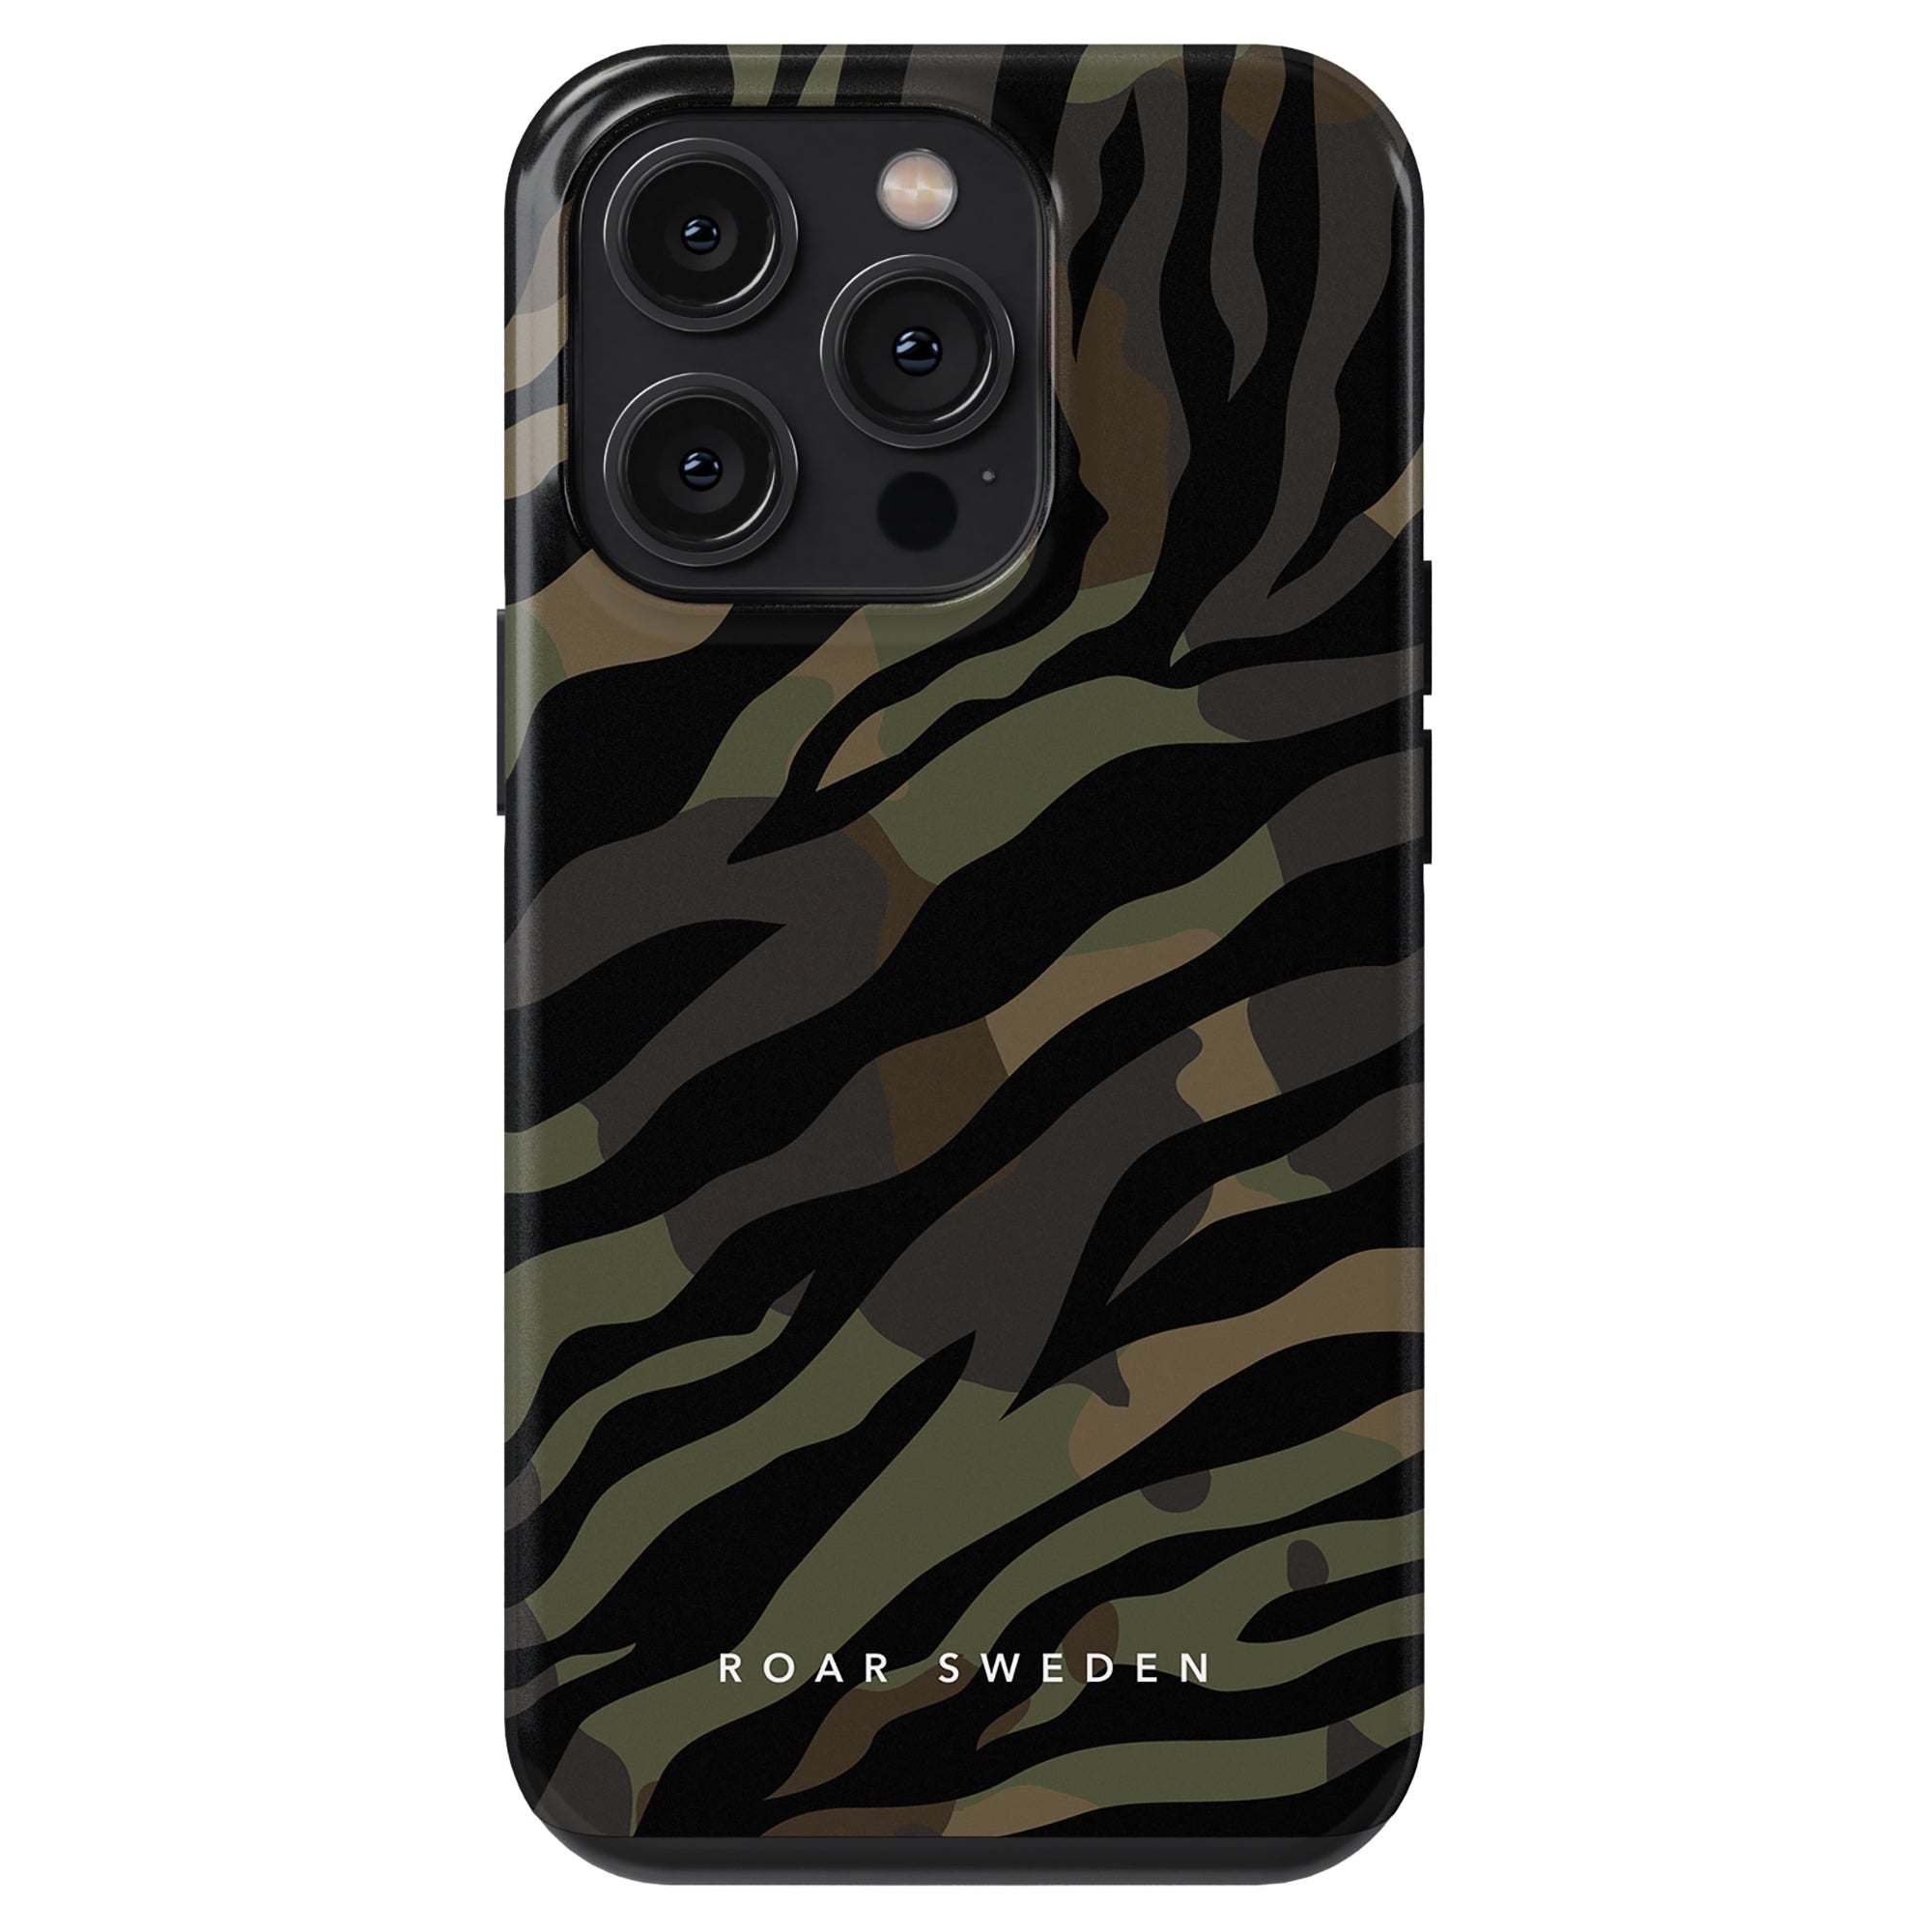 The trendy zebra print case for the stylish Army - Tough Case.